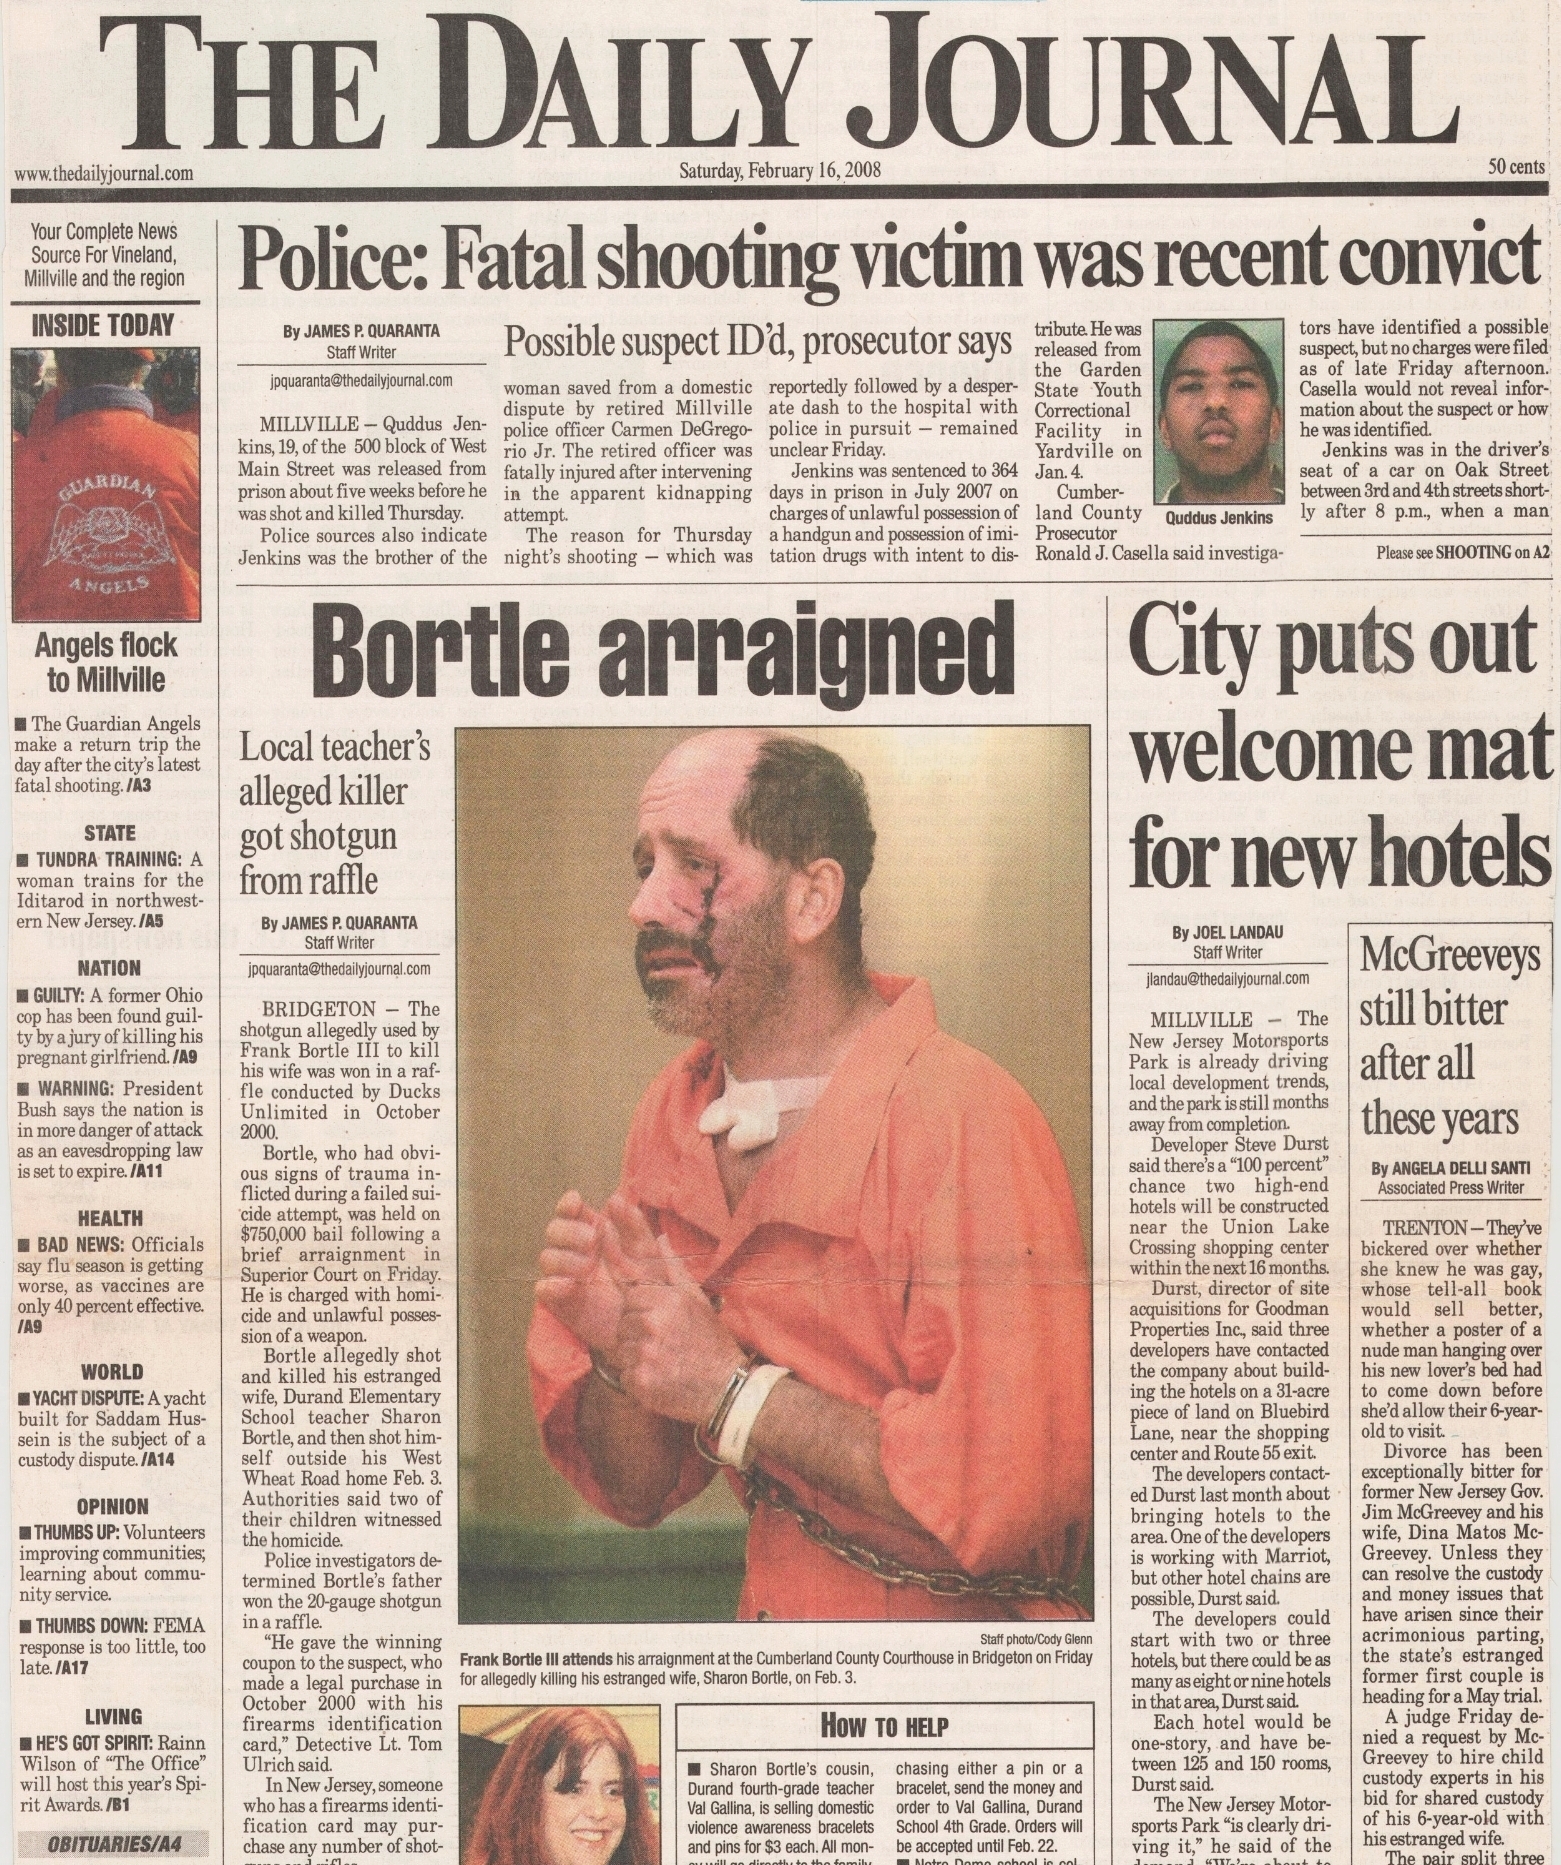  After a failed suicide attempt, Frank Bortle III is arraigned in the shooting death of his wife at Cumberland County Courthouse February 16 2008 /  The Daily Journal  